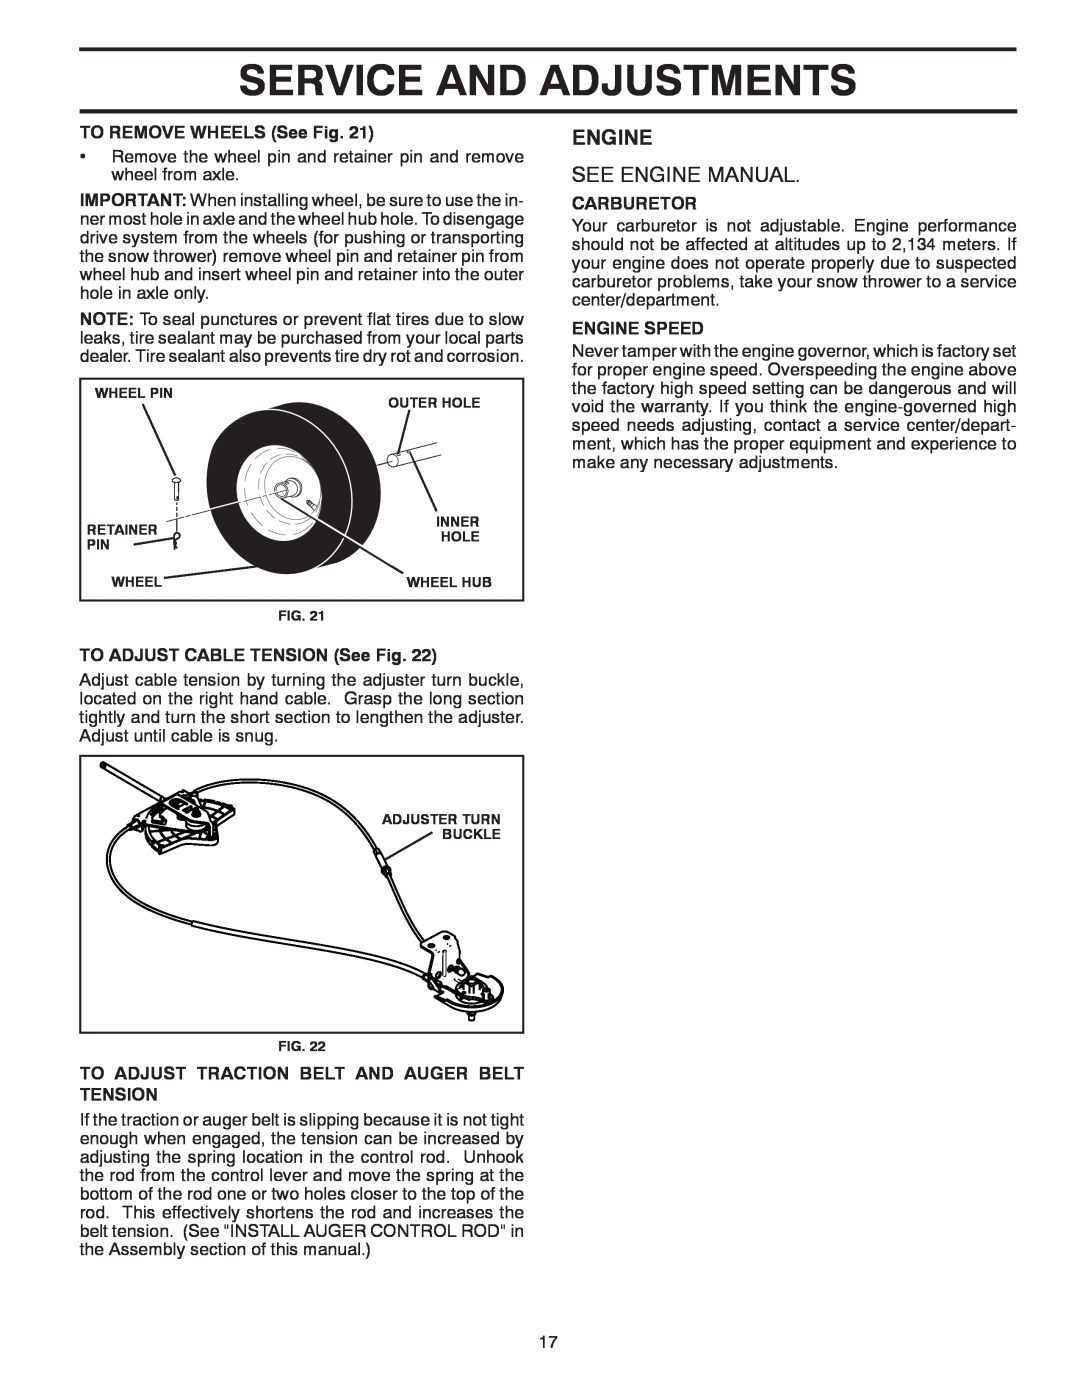 Poulan P14530ES See Engine Manual, Service And Adjustments, TO REMOVE WHEELS See Fig, TO ADJUST CABLE TENSION See Fig 